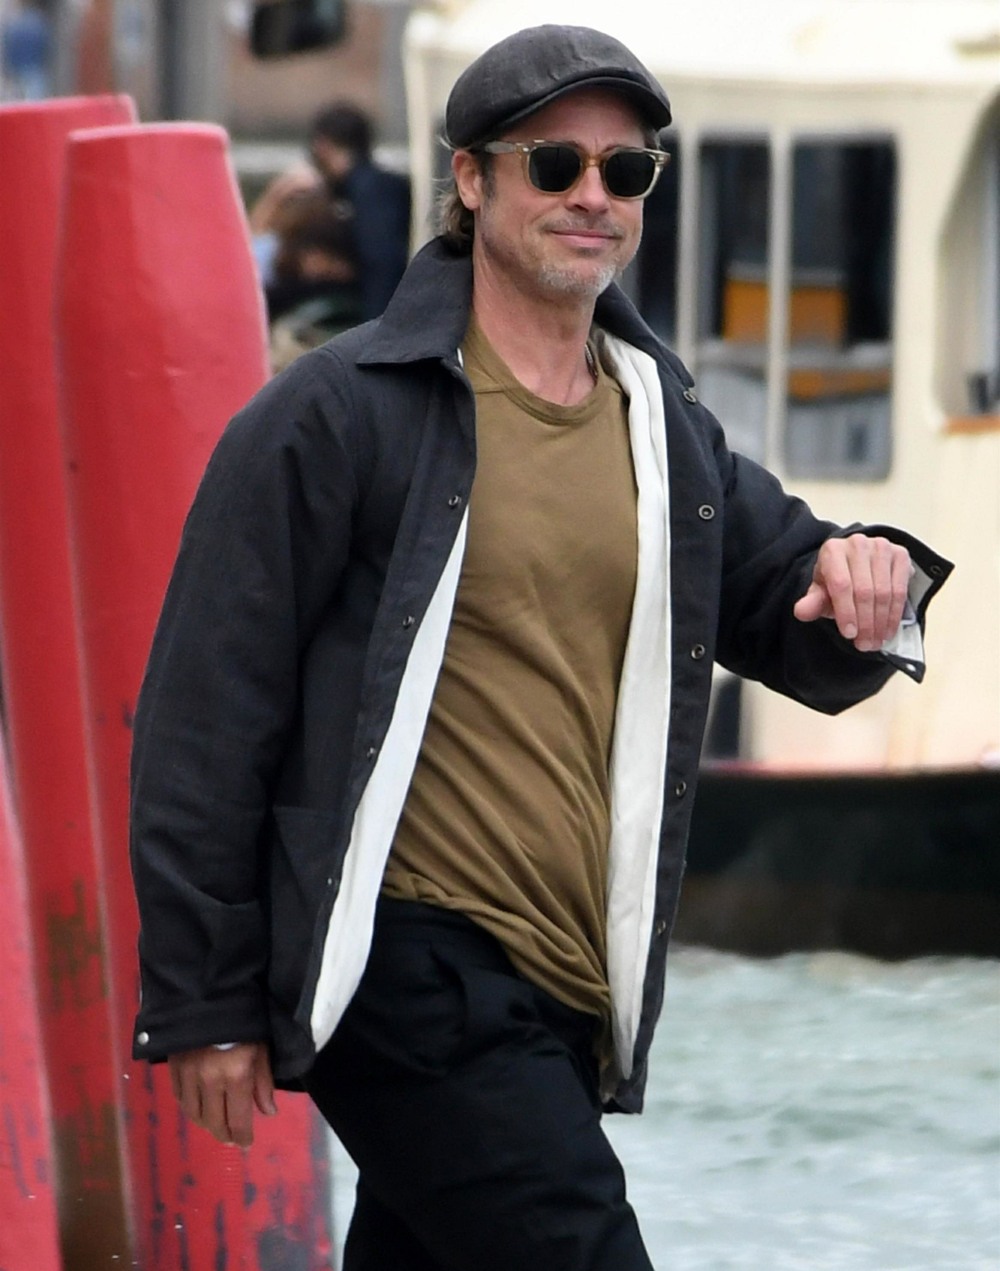 Brad Pitt visits the Biennale while out in Venice